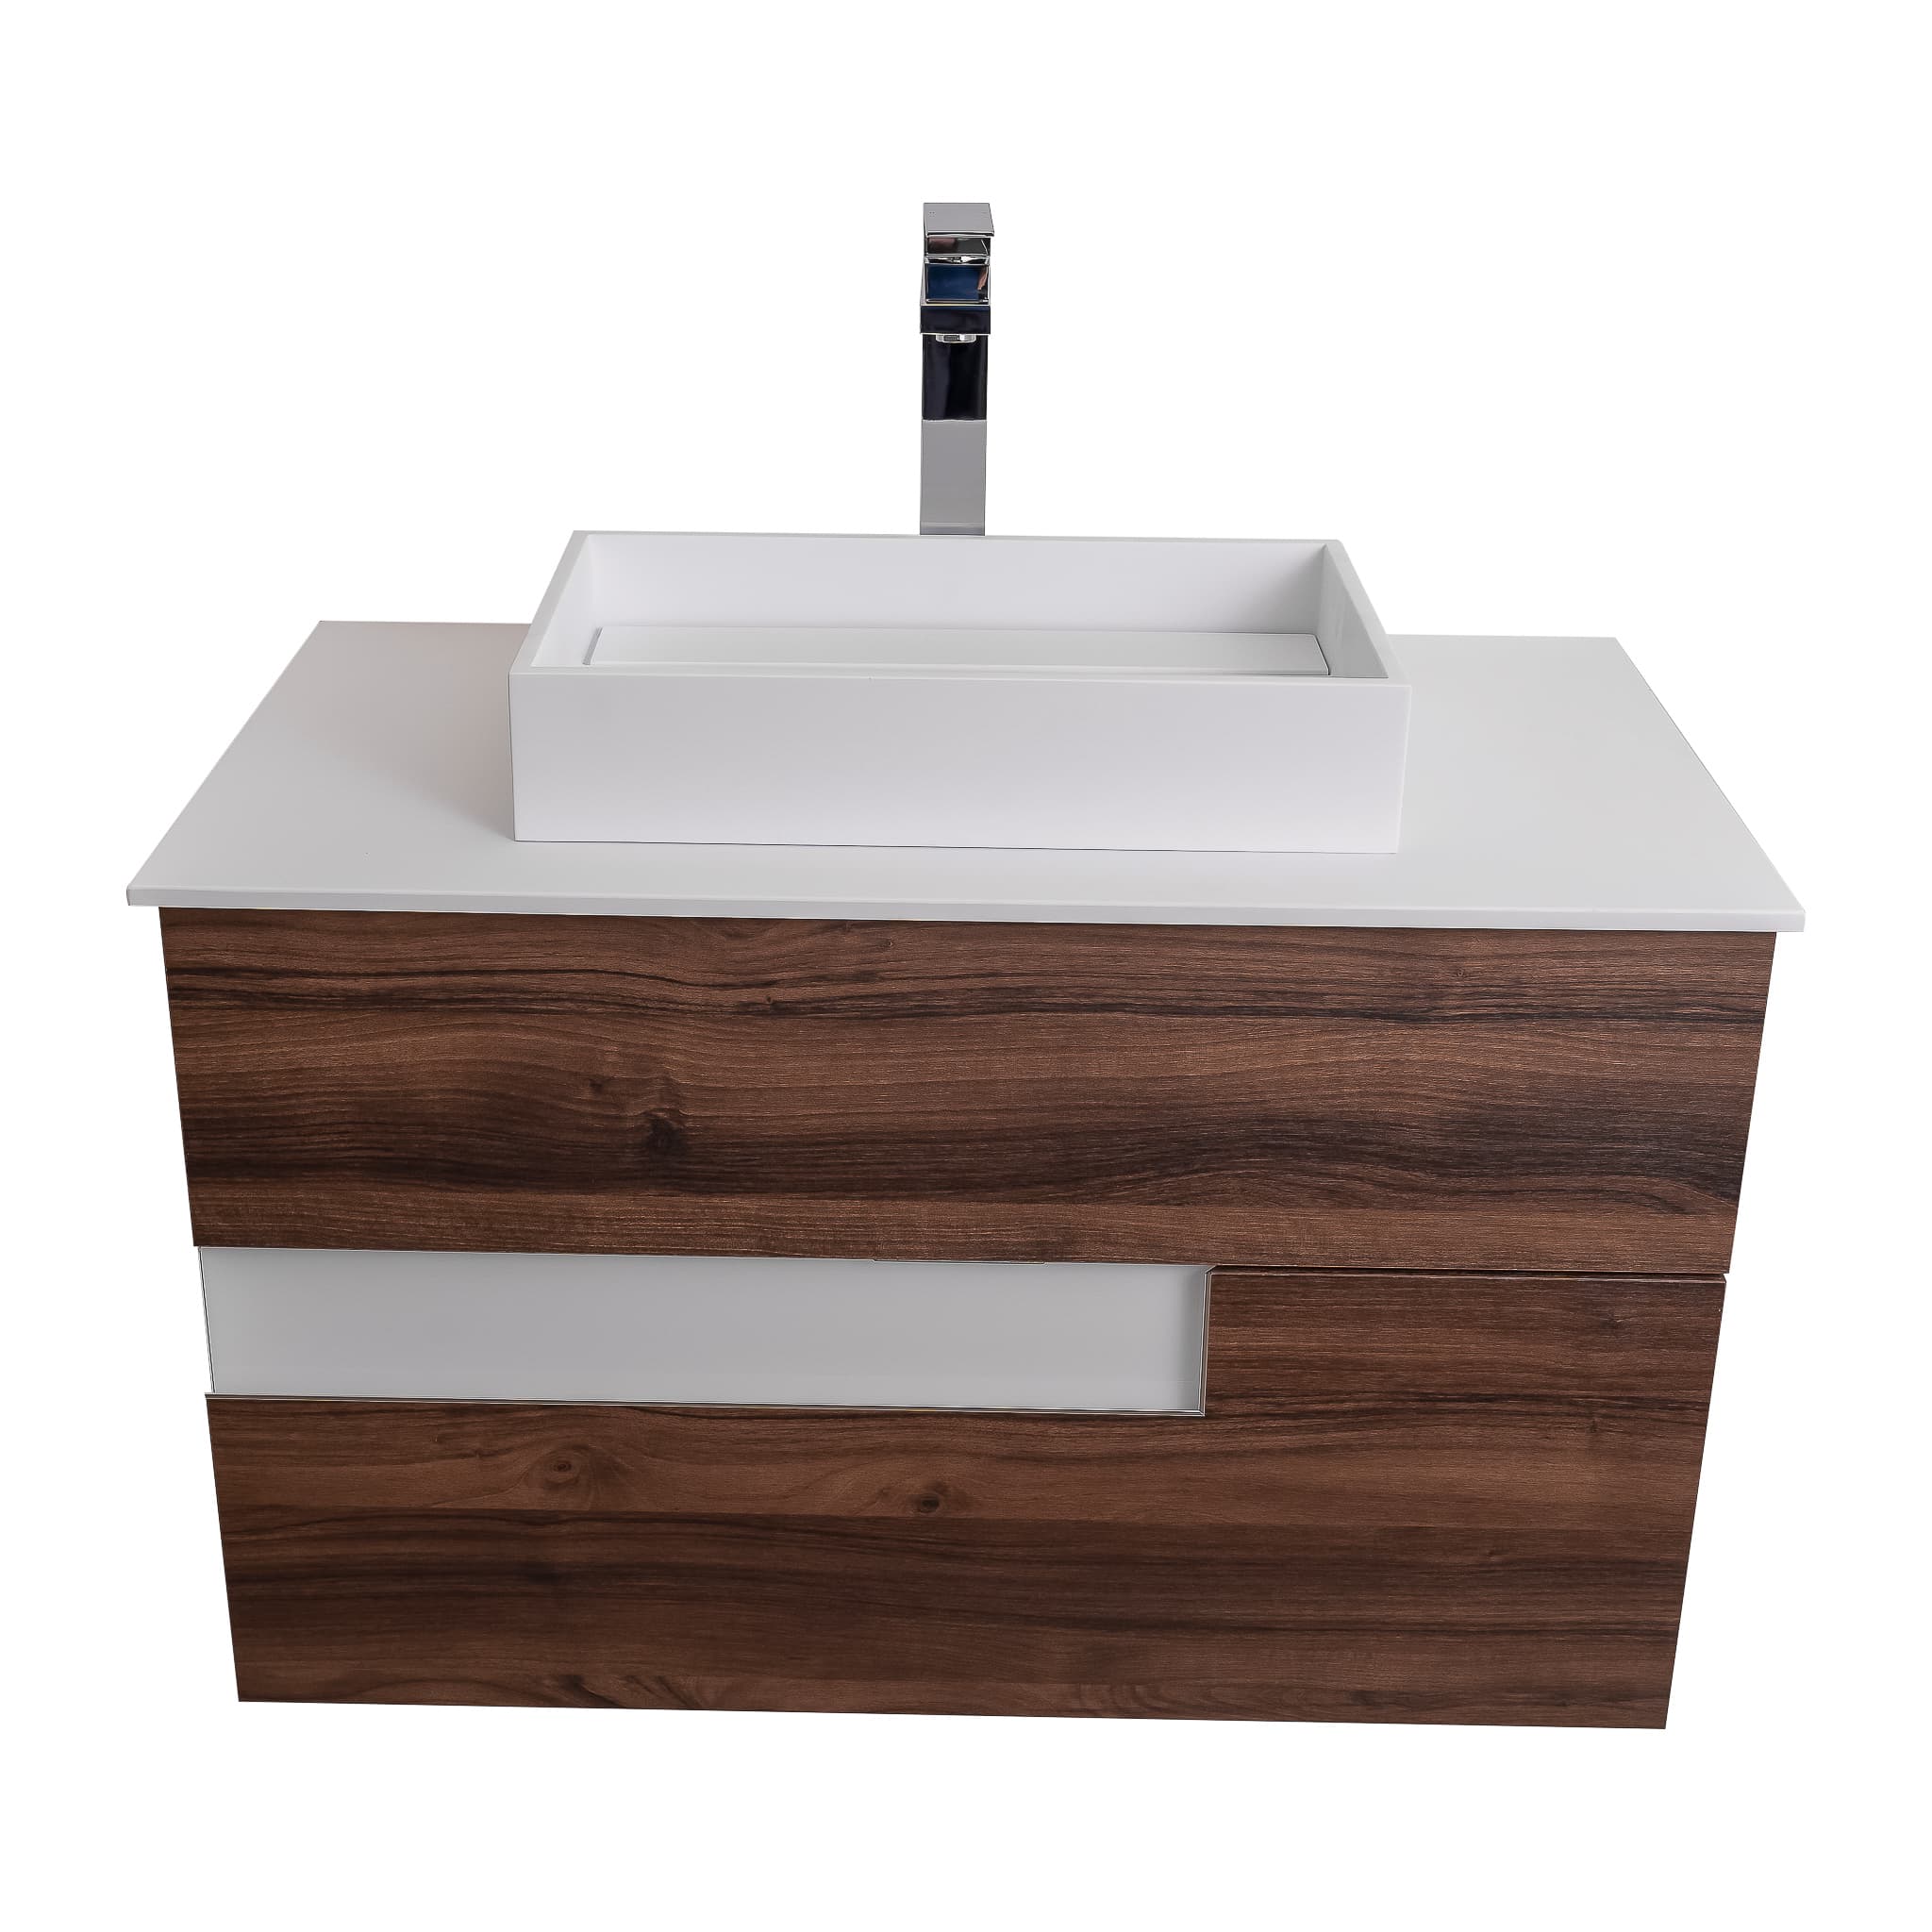 Vision 39.5 Valenti Medium Brown Wood Cabinet, Solid Surface Flat White Counter And Infinity Square Solid Surface White Basin 1329, Wall Mounted Modern Vanity Set